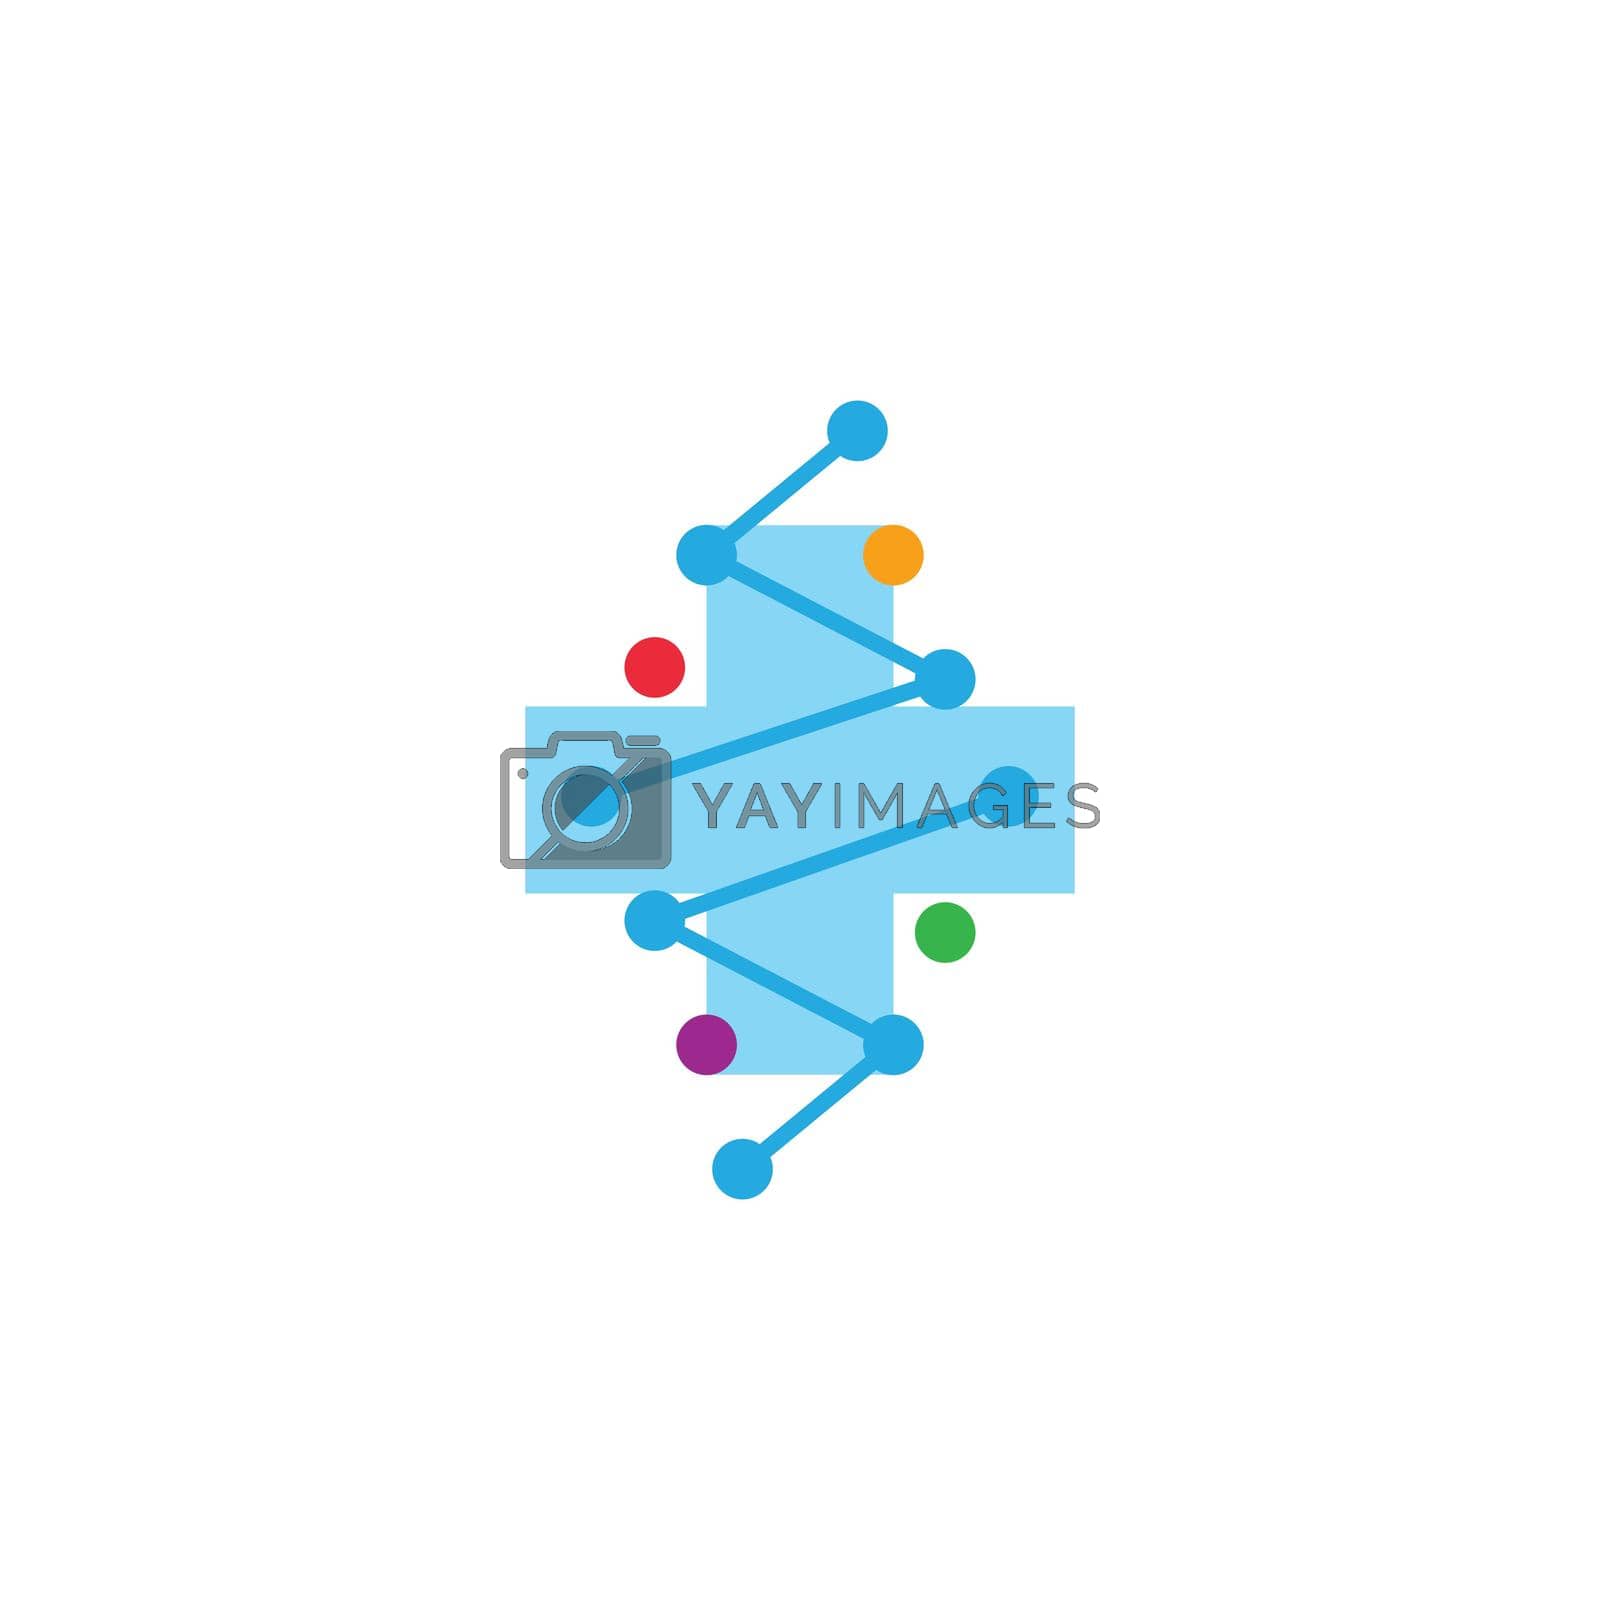 Royalty free image of DNA illustration vector by awk